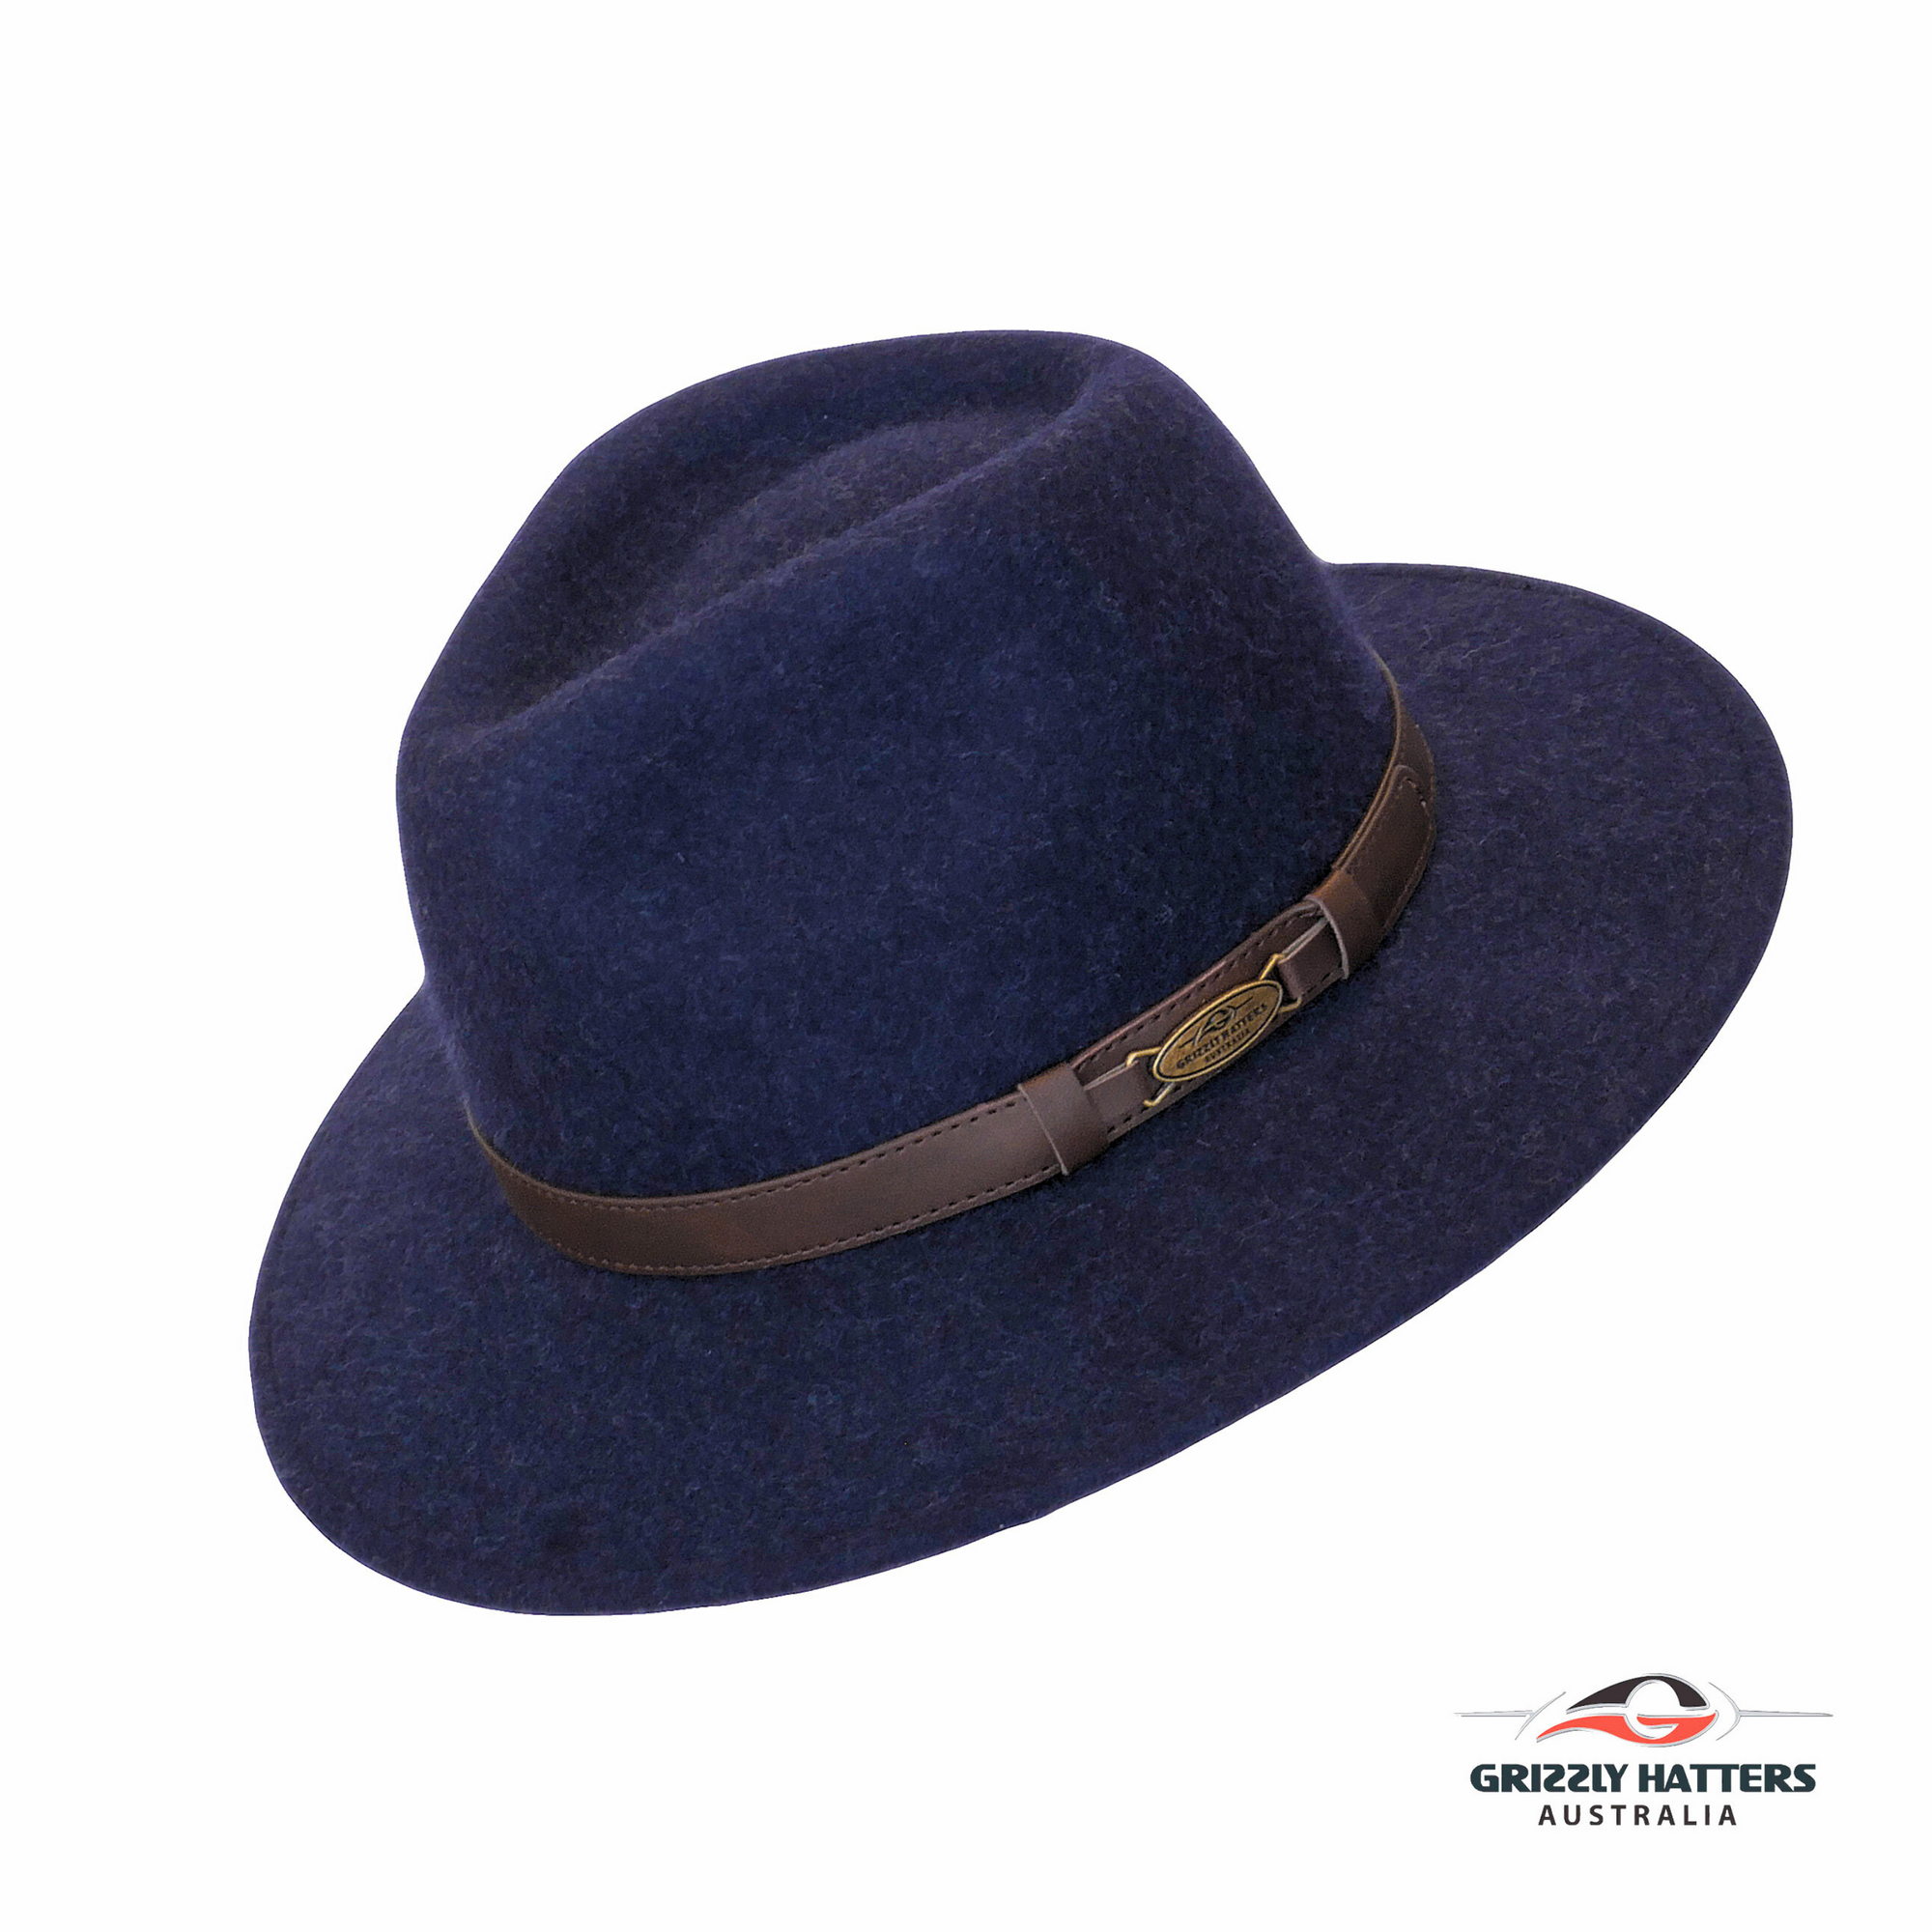 THE SAPPHIRE Fedora Hat in GREIGE